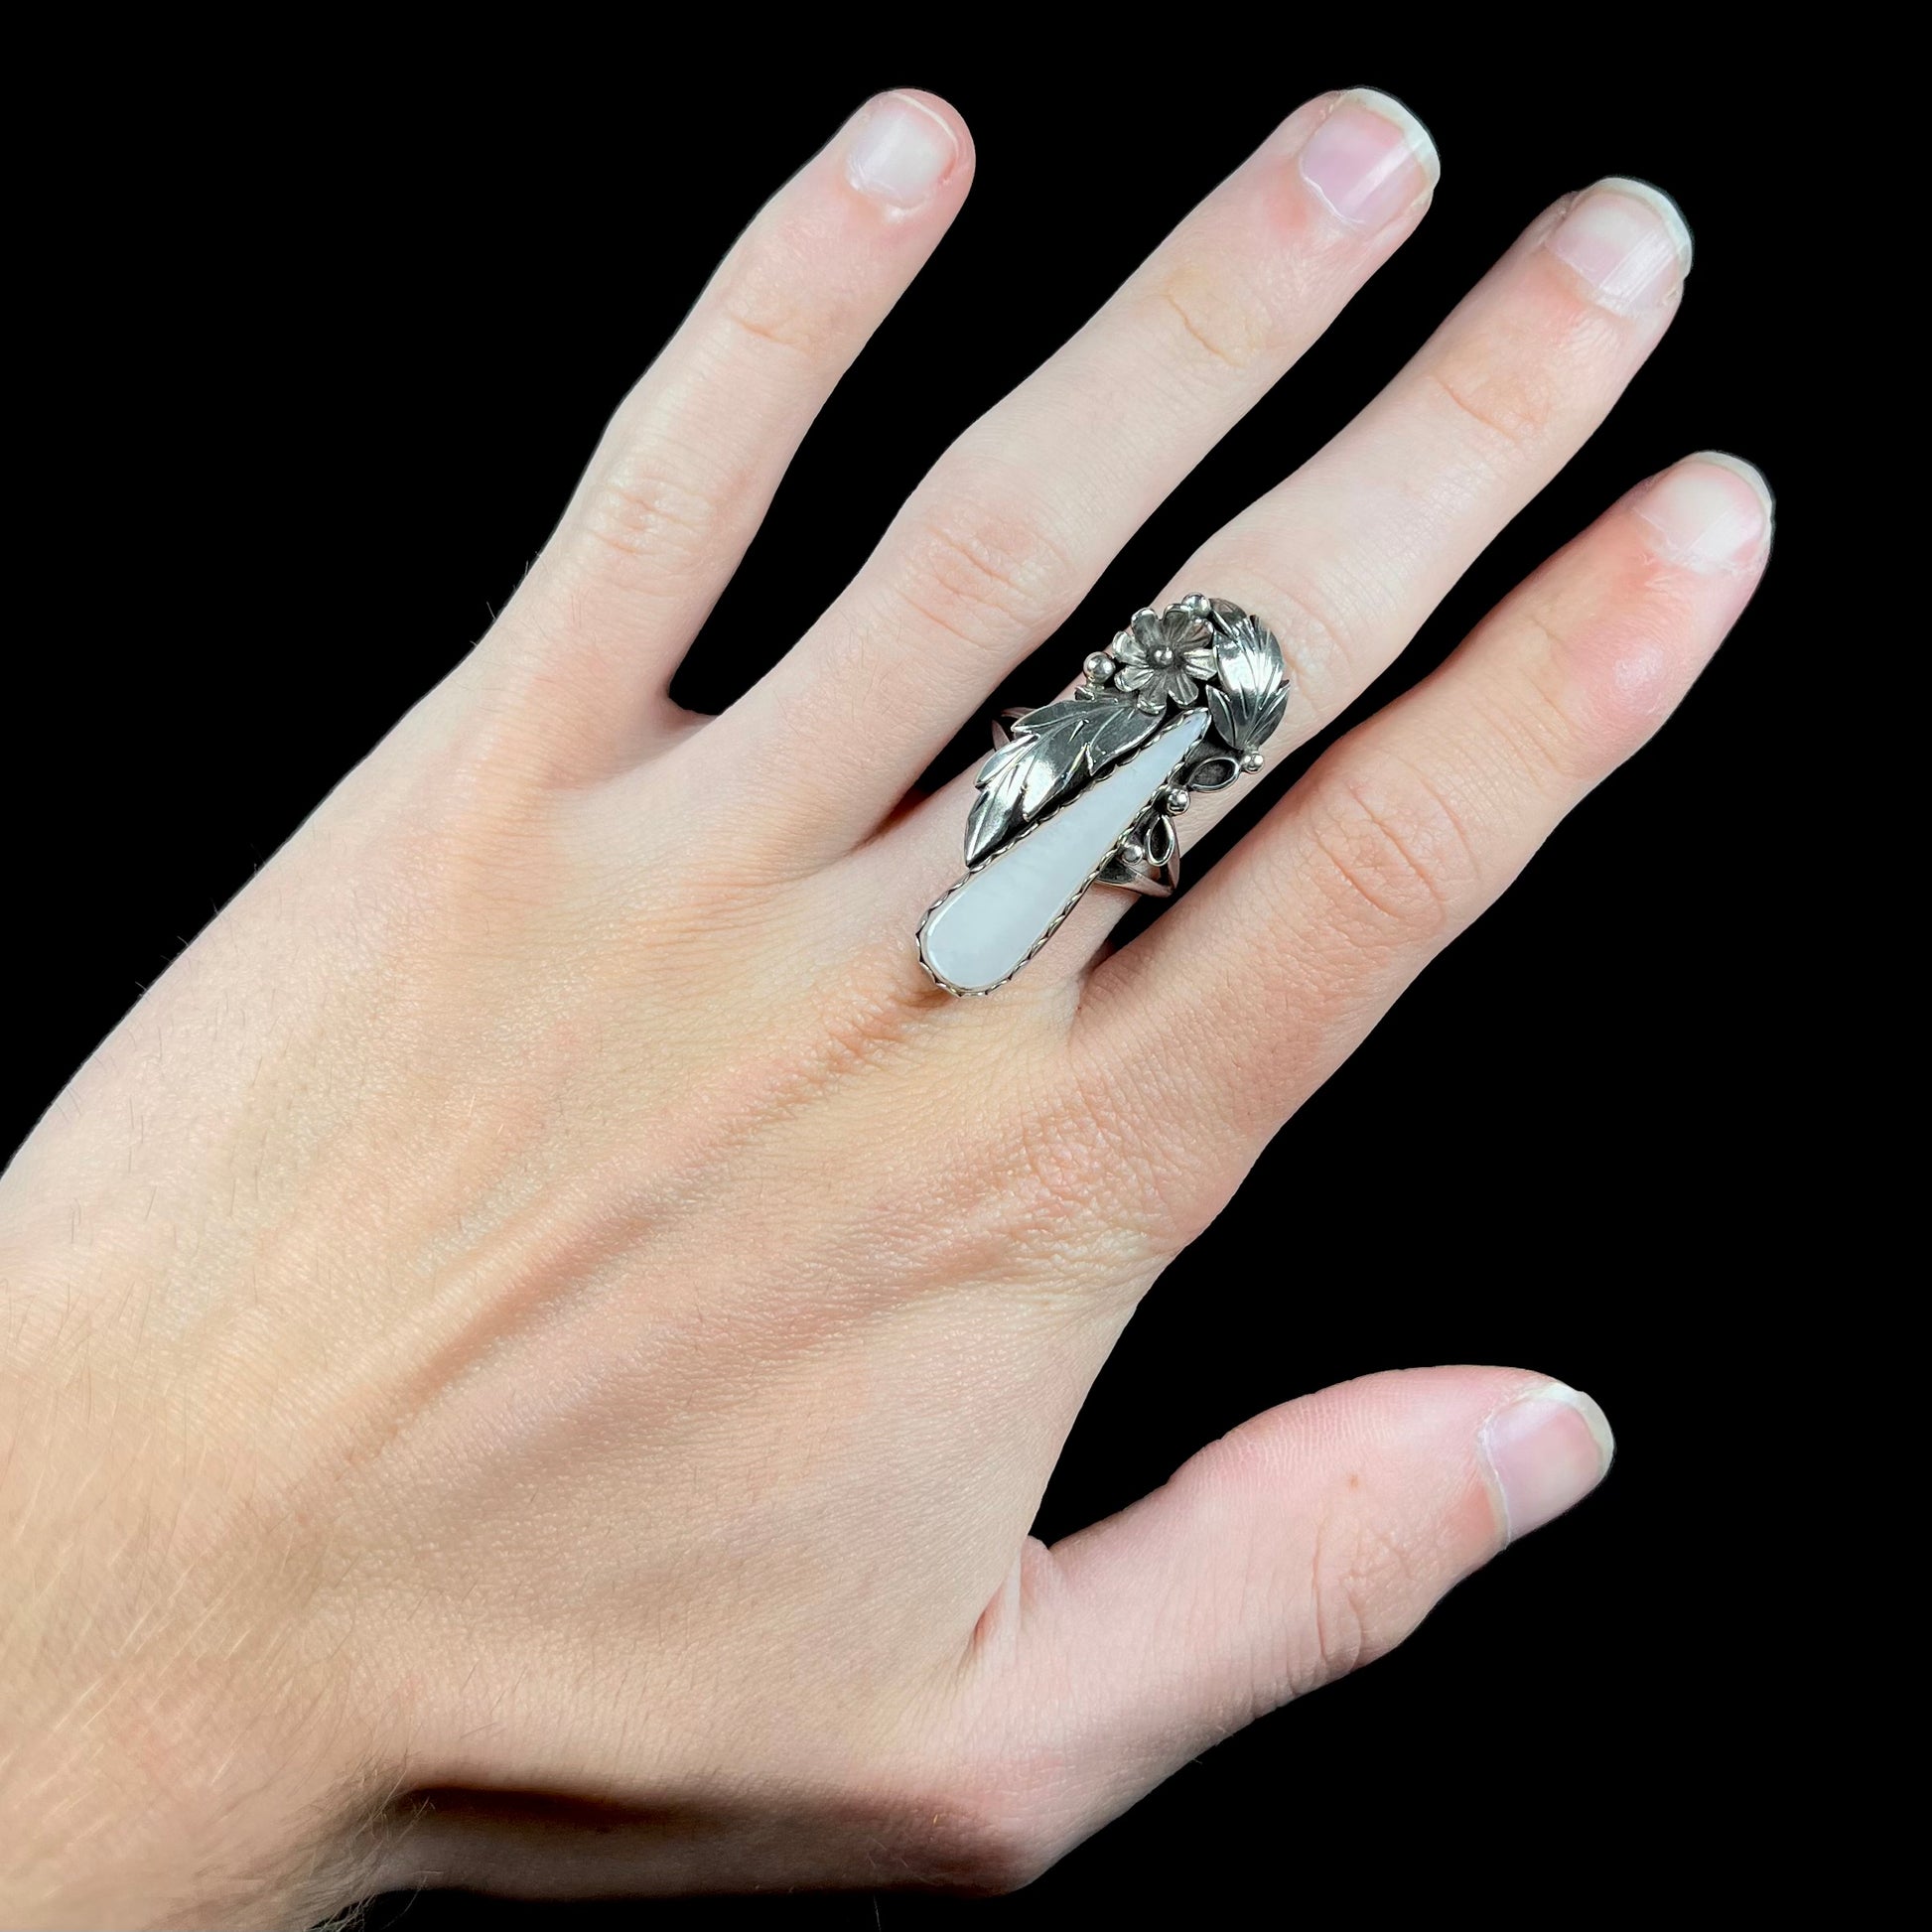 A sterling silver mother of pearl drop ring handmade in Navajo style, signed "MORNINGSTAR."